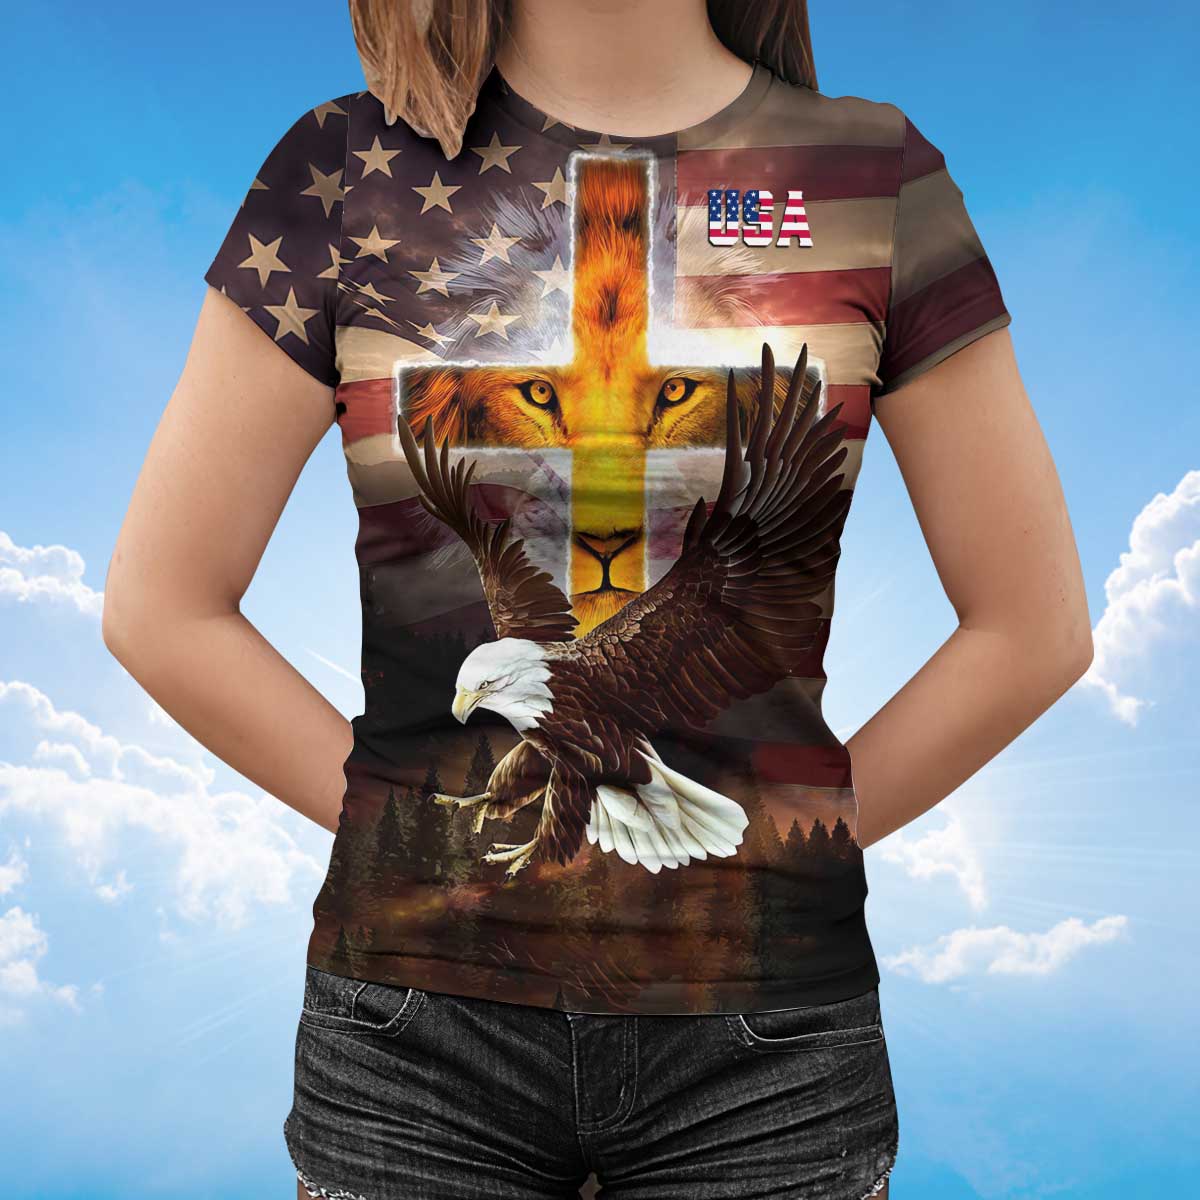 3D All Over Printed Lion Cross T Shirt Eagle And Usa Strong Shirt For Patriotic Day